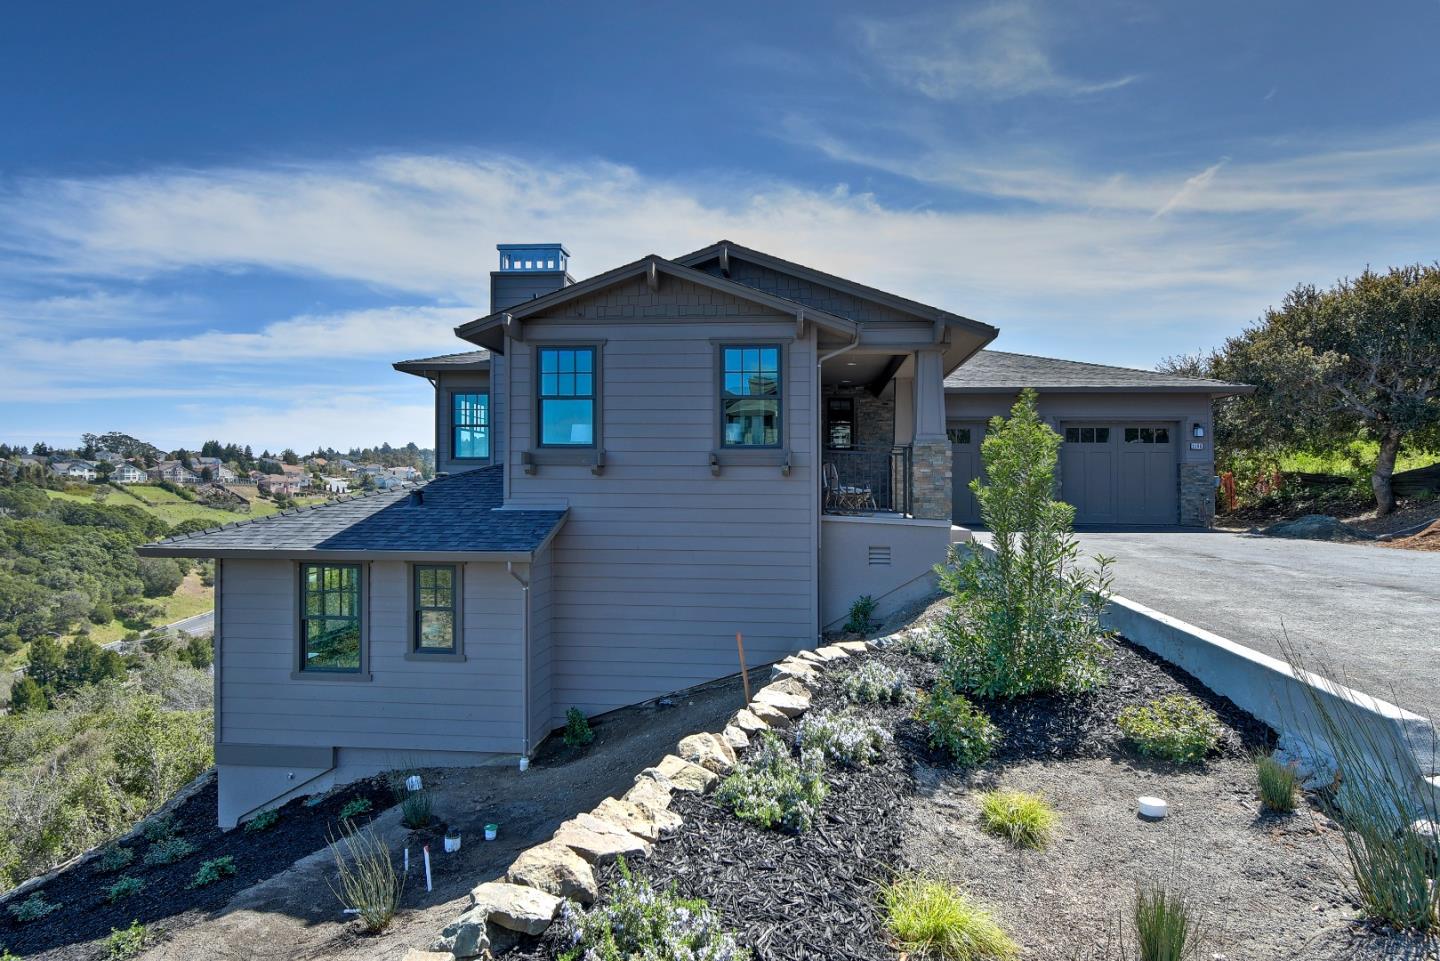 This new custom built executive home boasts incredible views from nearly every room setting the stage for gracious living and entertaining. Thoughtfully designed and quality built on a cul-de-sac that backs up to acres of open space! The grand entry leads to a beautifully appointed formal living room and inviting dining area. The gourmet kitchen features a walk-in pantry, large center island with breakfast bar that opens to the inviting covered porch enhanced by incredible views! Elegant family room with vaulted ceiling, large picture windows and fireplace. Perfectly placed laundry room/mudroom located off the attached oversized 2-car garage. Tucked off the entrance is a gracious and private guest suite and a conveniently placed half bathroom. Downstairs is the grand master suite with spa-like bathroom and large walk-in closet. Two additional bedrooms share a full hall bathroom. Conveniently located near restaurants, shopping and major streamlined commute routes.